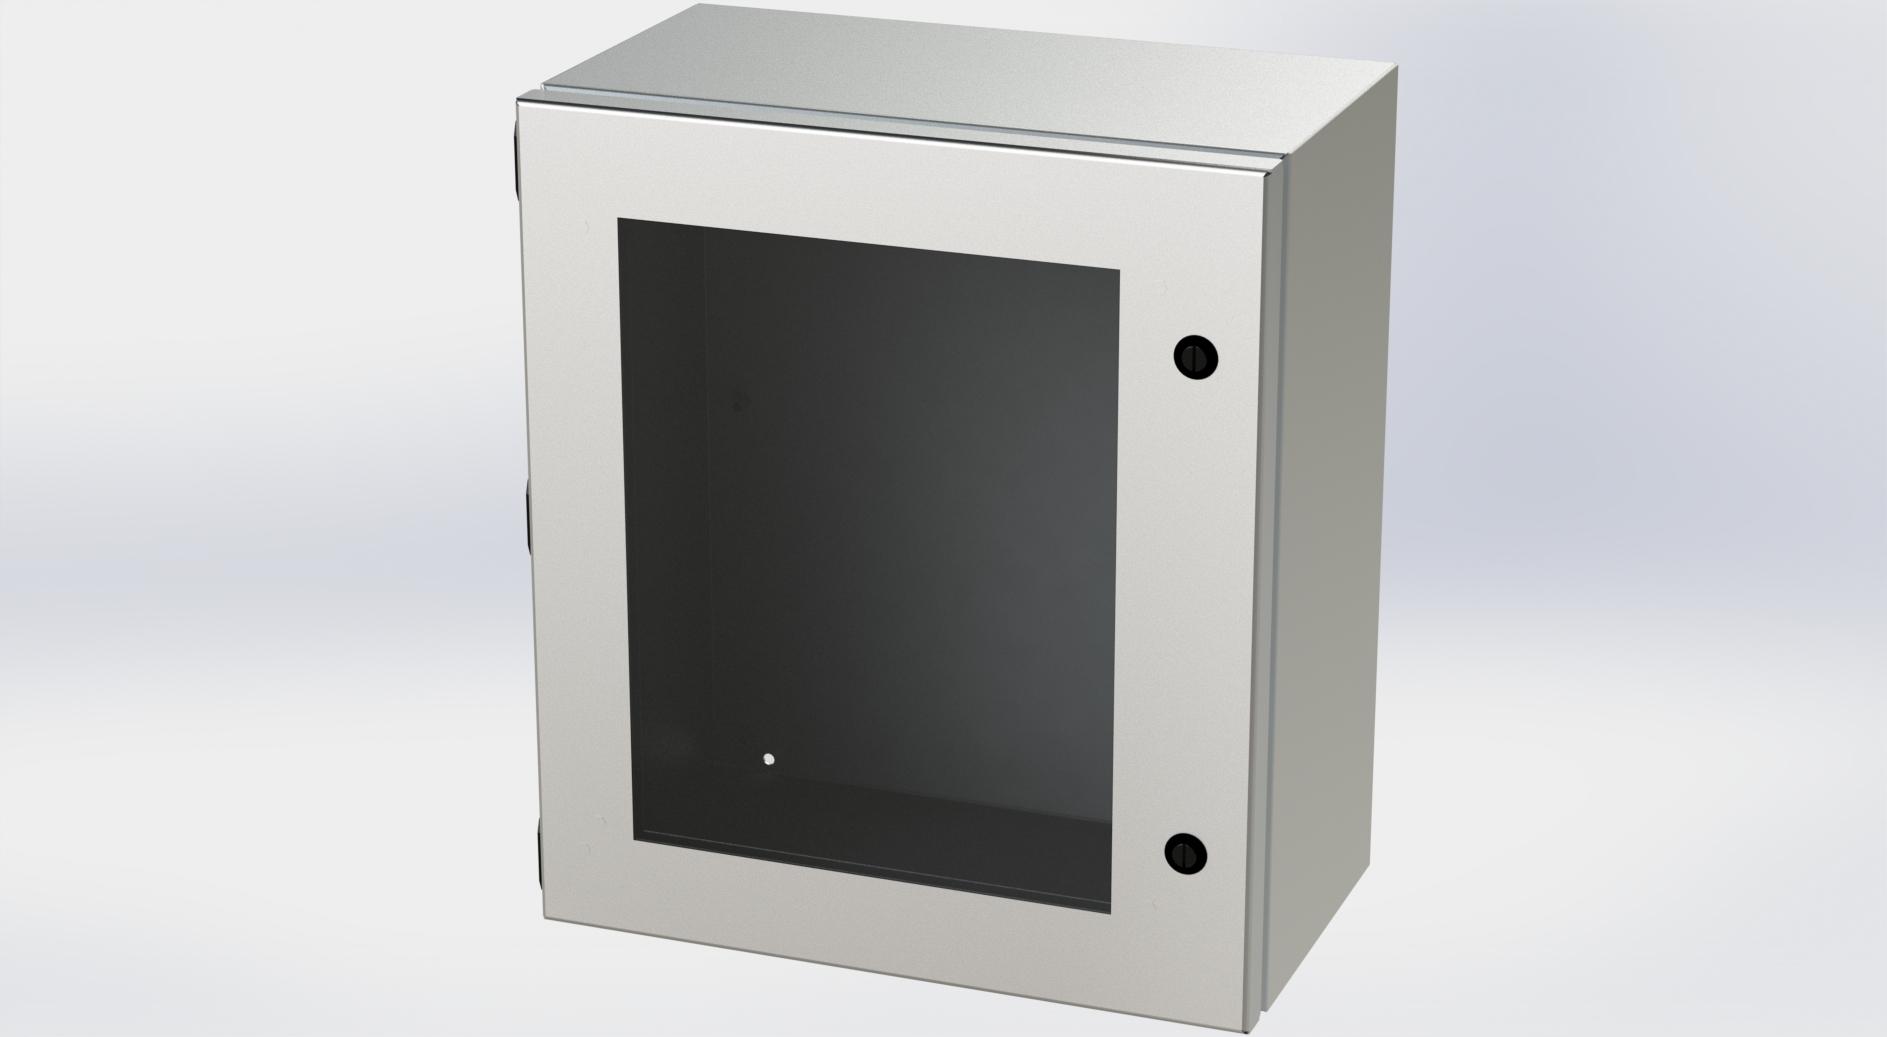 Saginaw Control SCE-16148ELJWSS6 S.S. ELJ Enclosure W/Viewing Window, Height:16.00", Width:14.00", Depth:8.00", #4 brushed finish on all exterior surfaces. Optional panels are powder coated white.